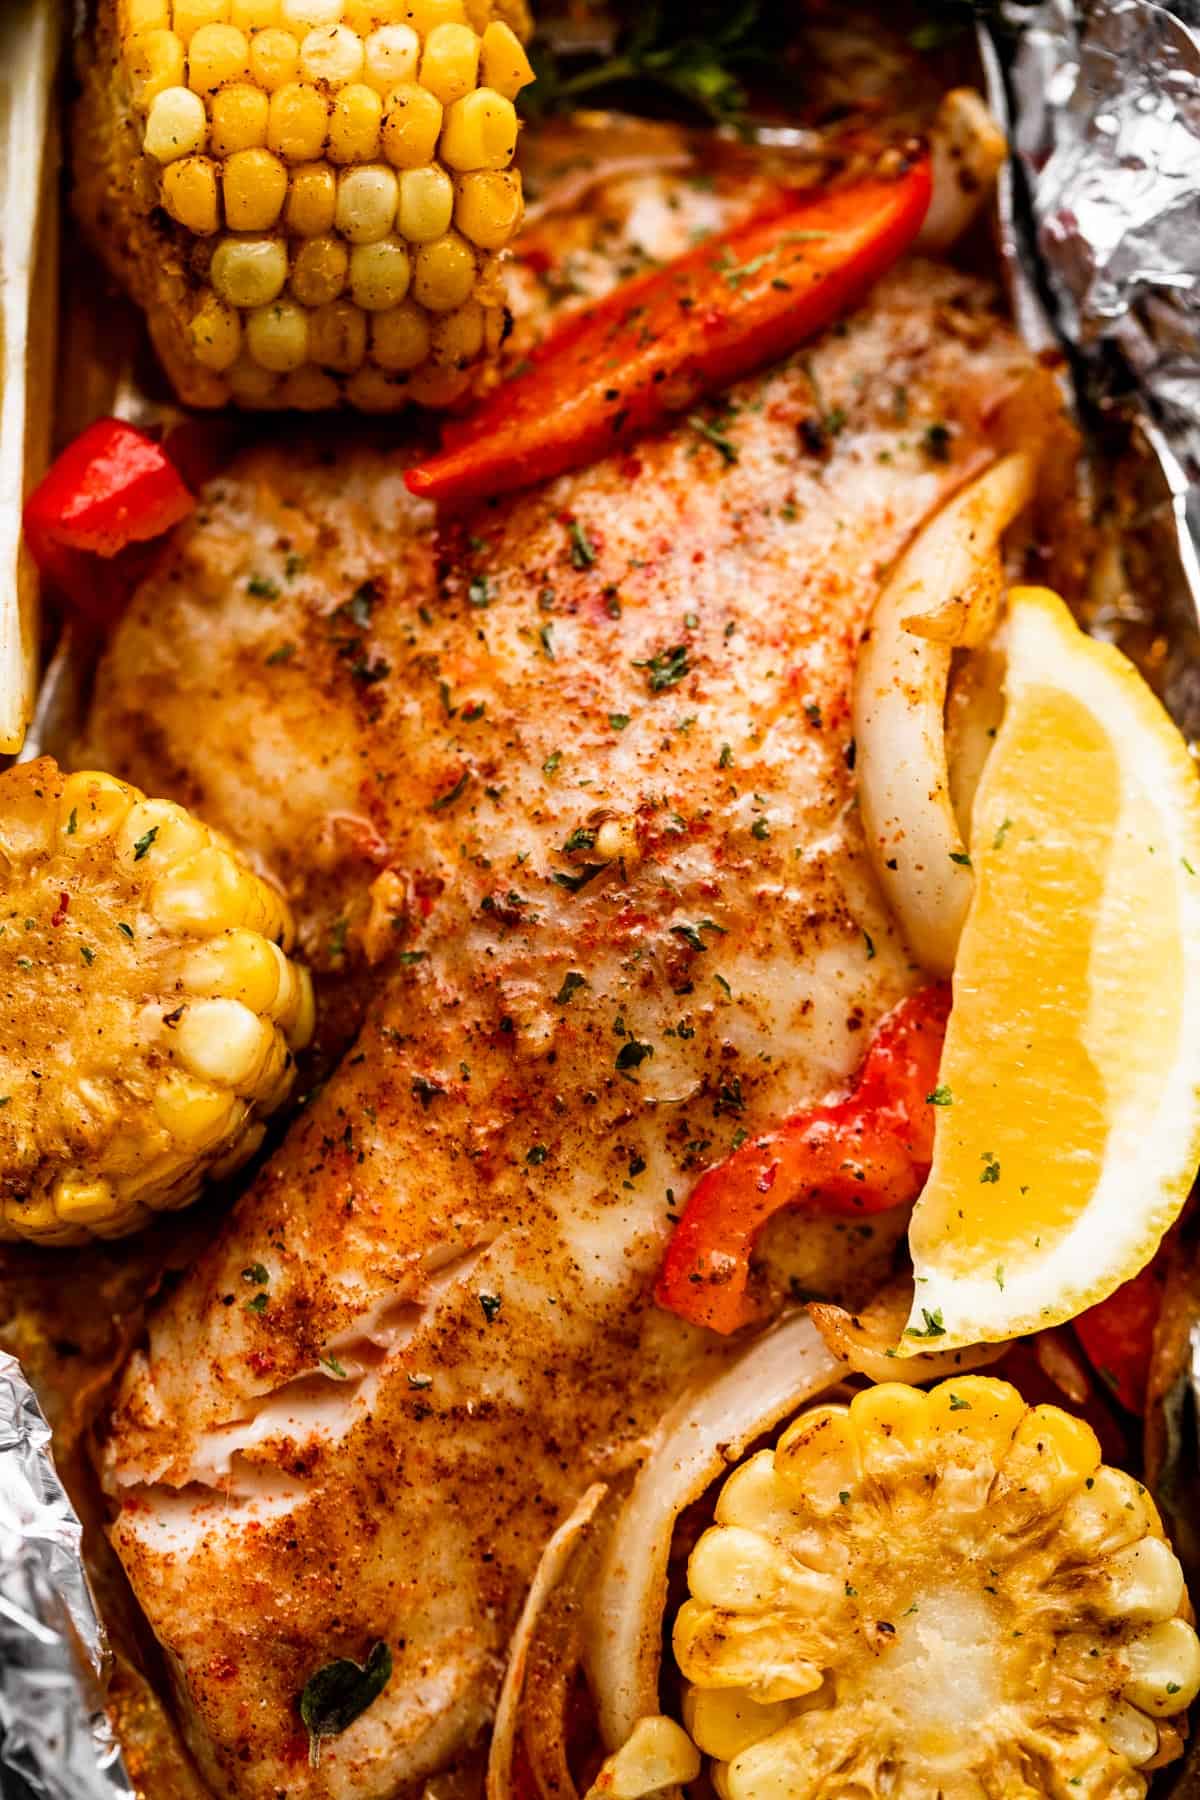 overhead shot of grilled tilapia filet set on a piece of foil and corn on the cob, lemon slices, and veggies arranged around the fish.